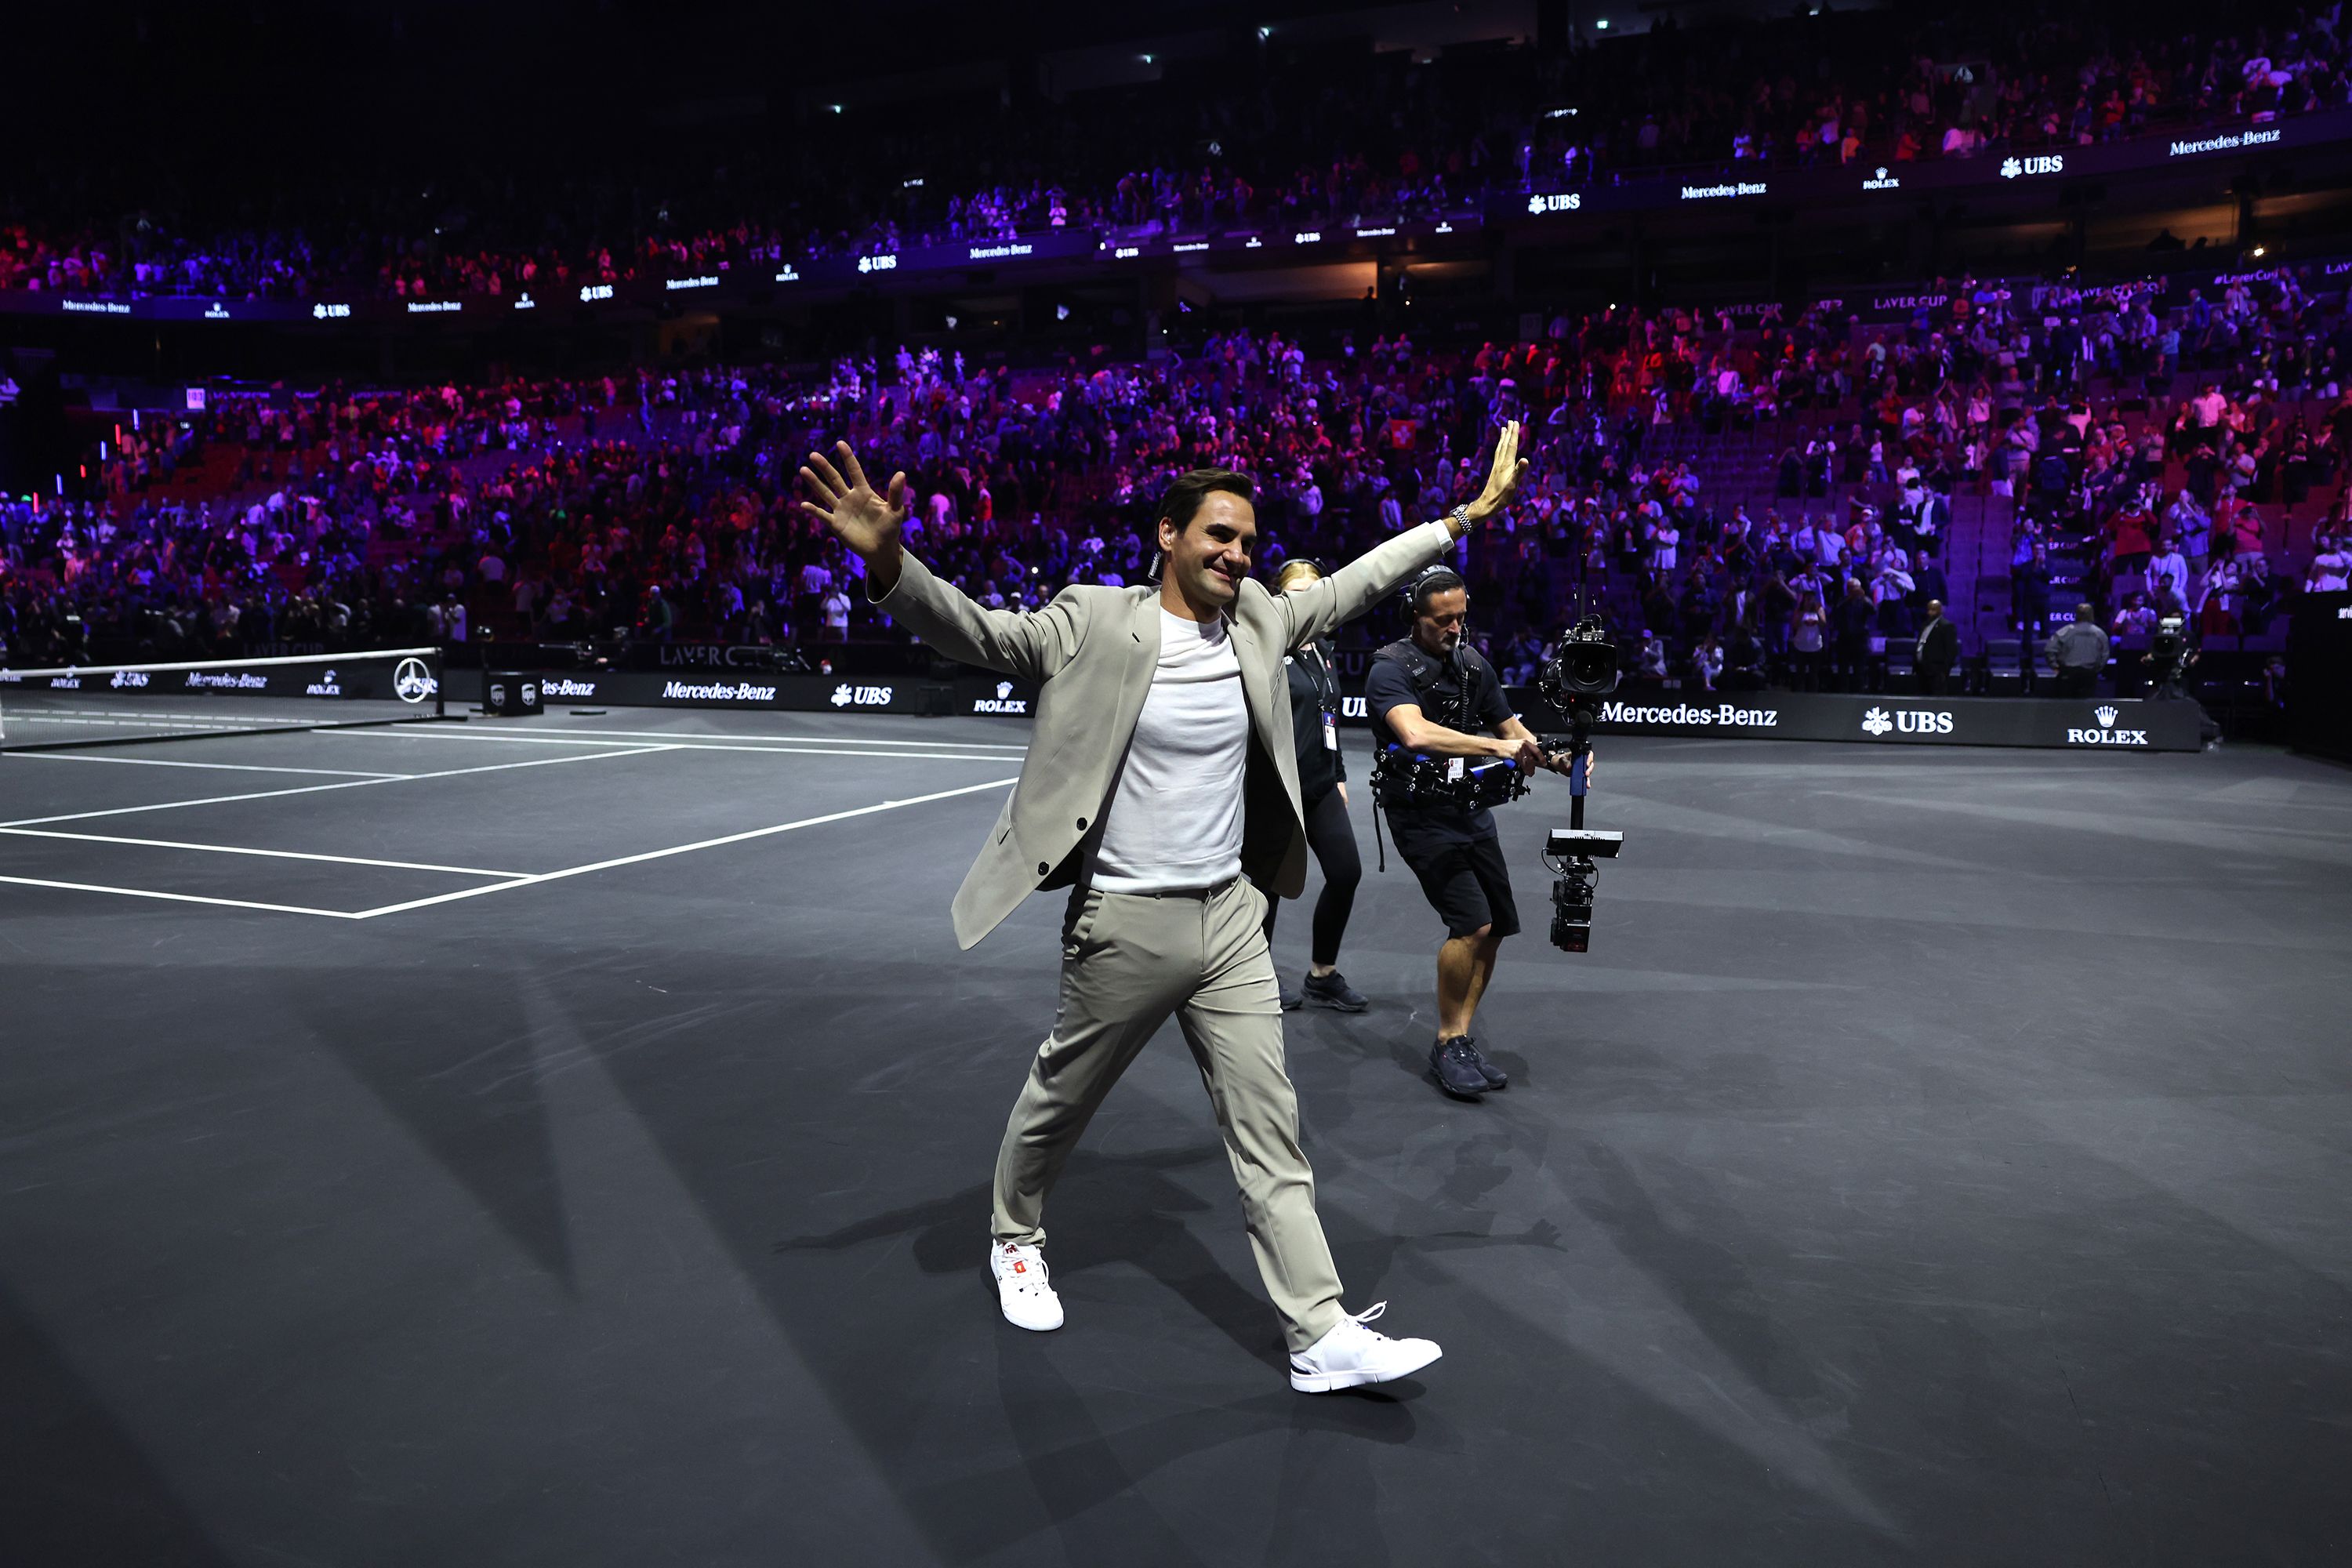 Roger Federer says he's 'definitely done' with professional tennis